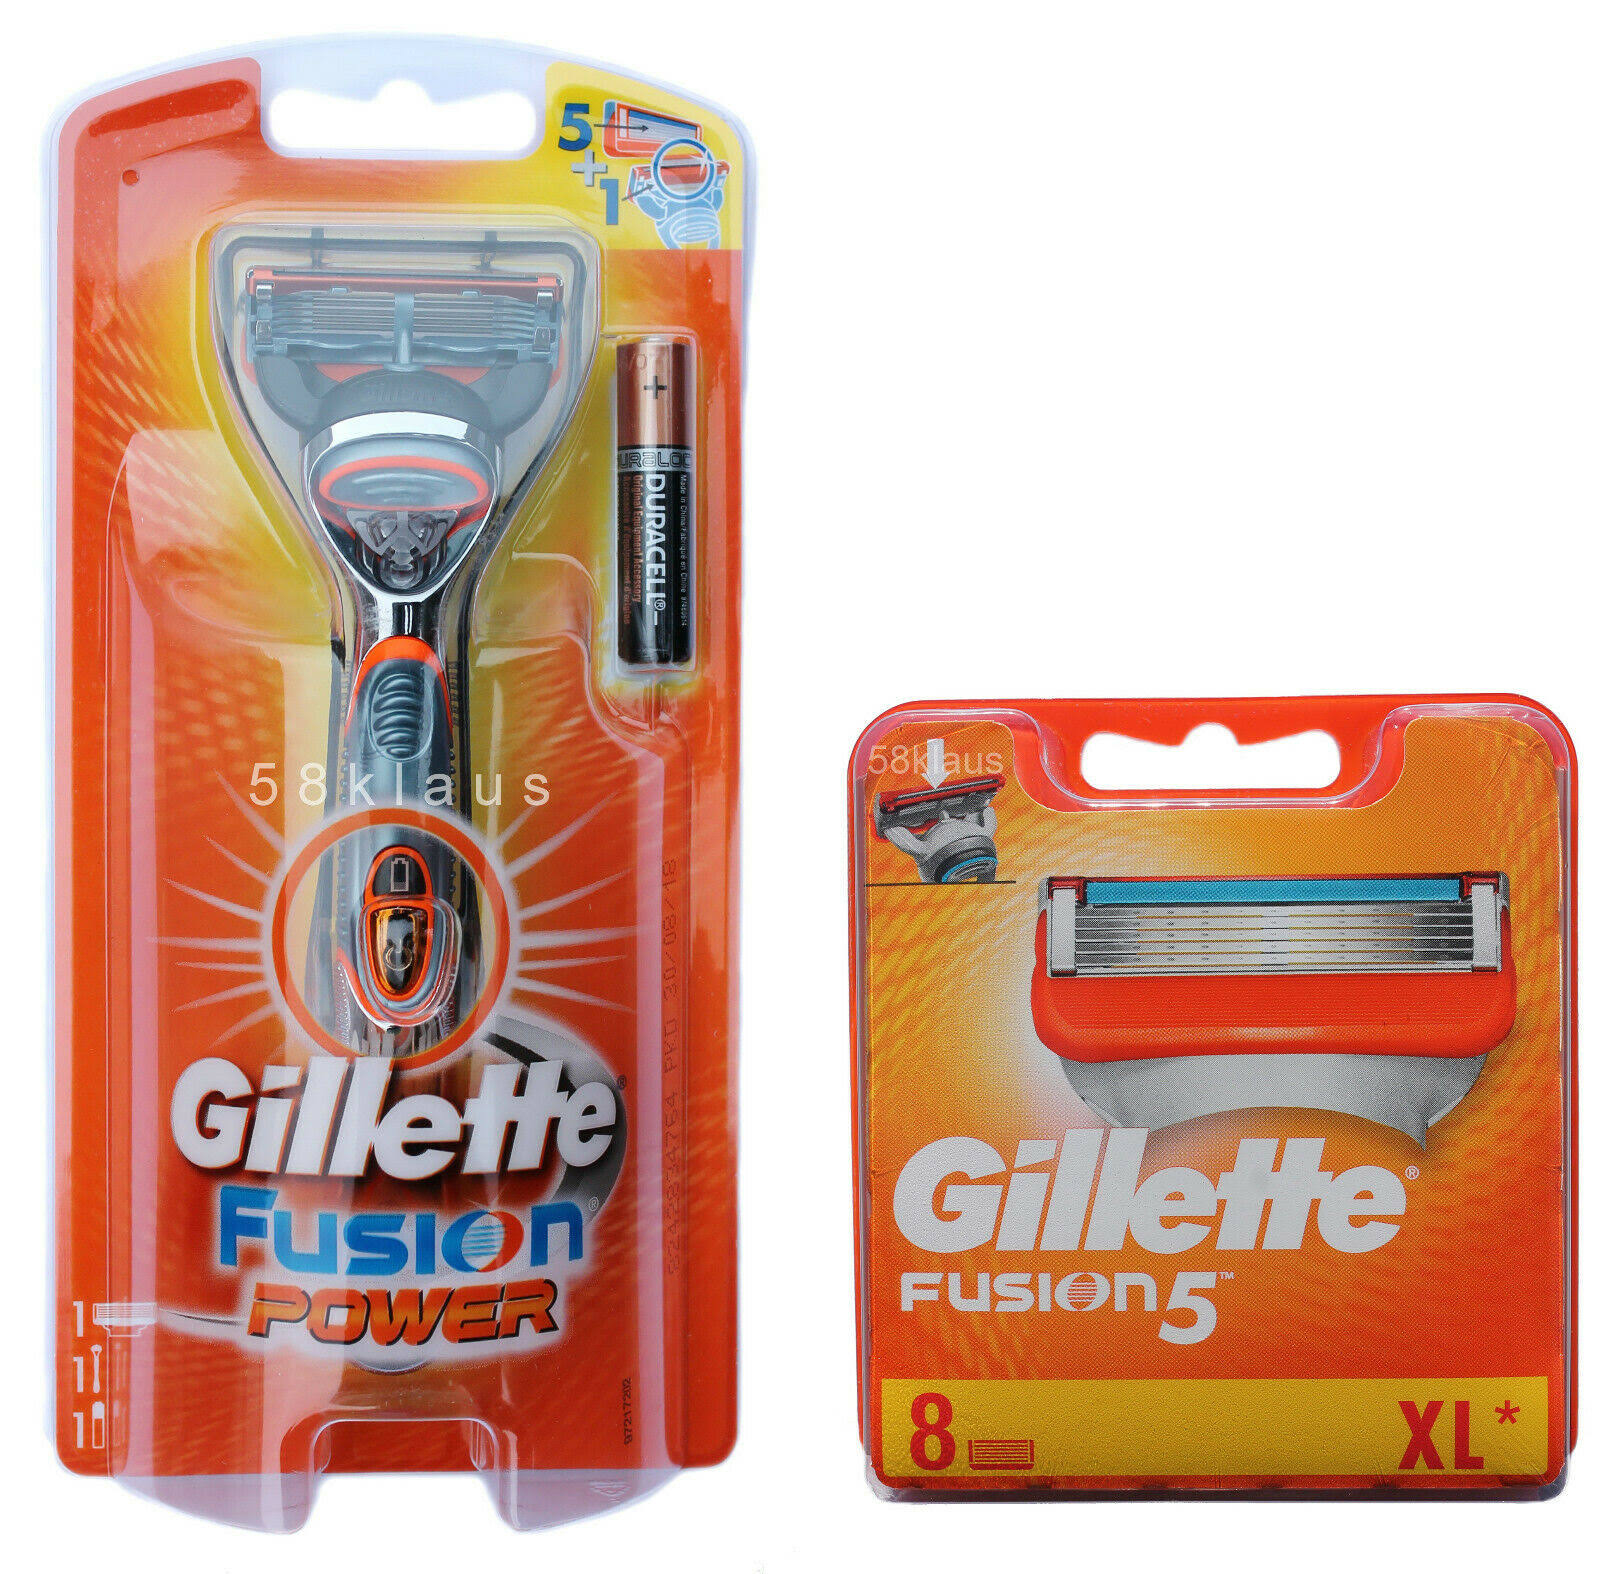 Gillette Fusion Power Handle with 1 Cartridge, Battery Operated